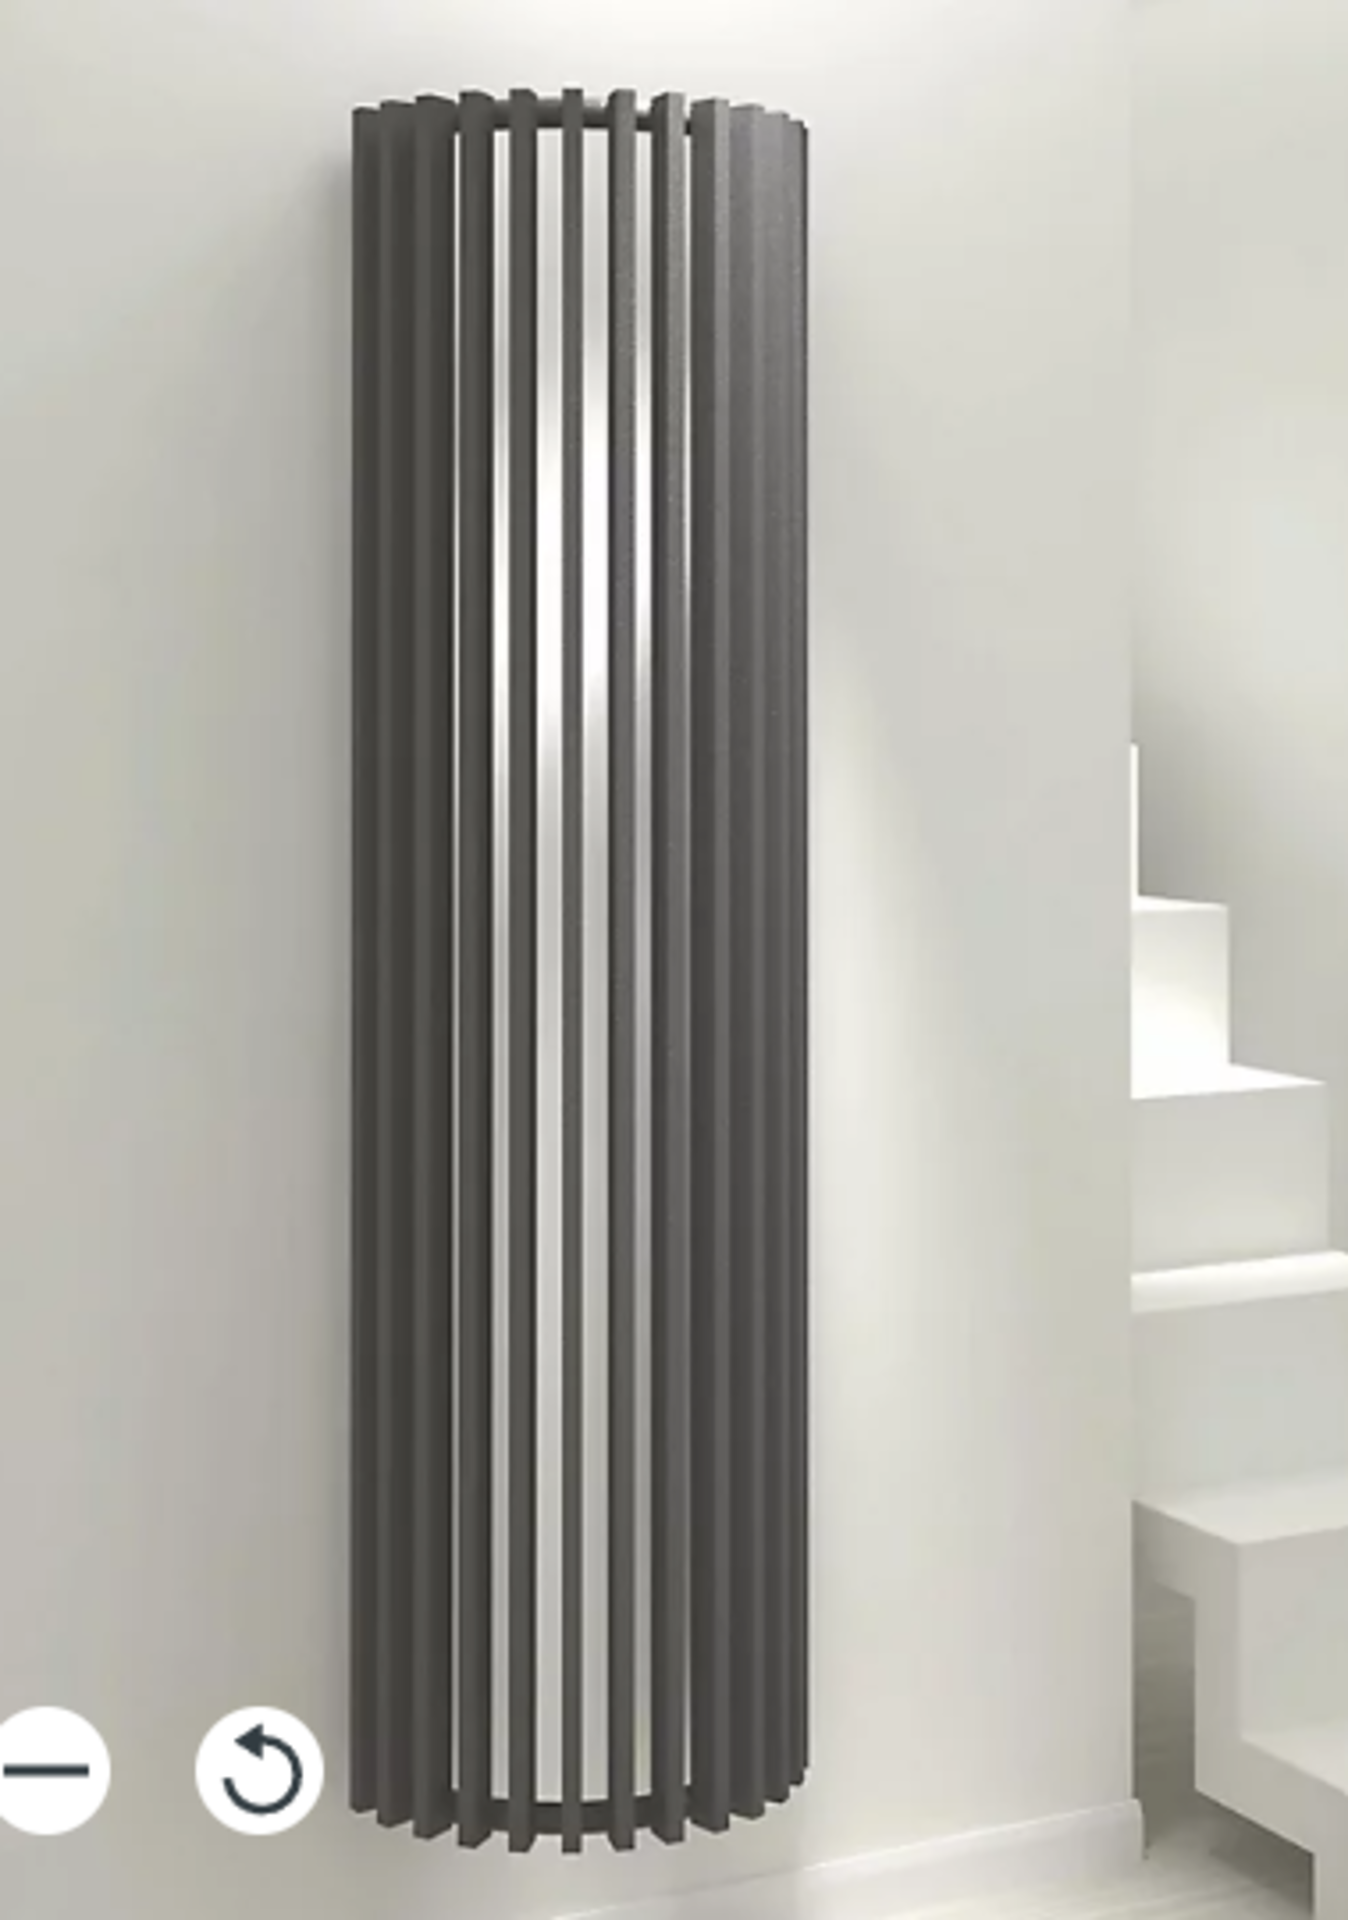 New & Boxed Talles Anthracite Vertical Designer Radiator. Size: (W)500mm x (H)1800mm. RRP £540.